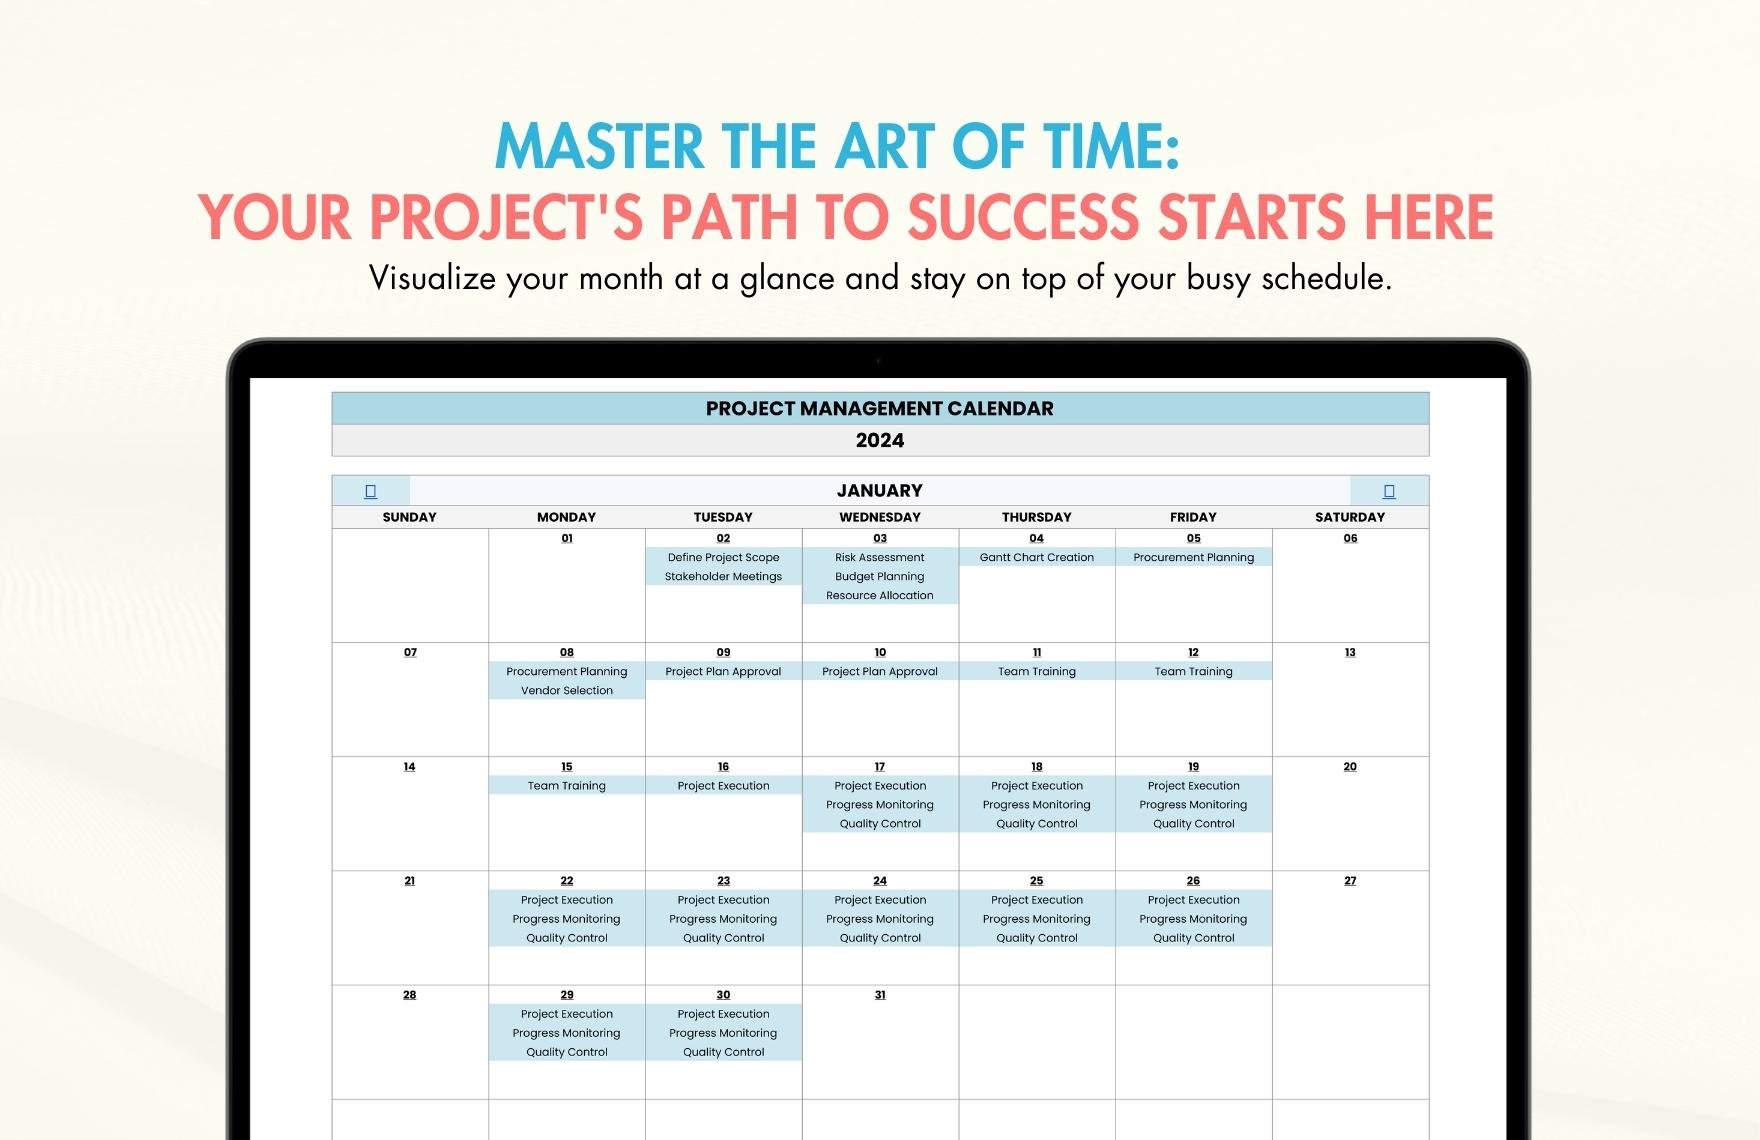 Free Project Management Calendar Template - Download in Excel, Google ...